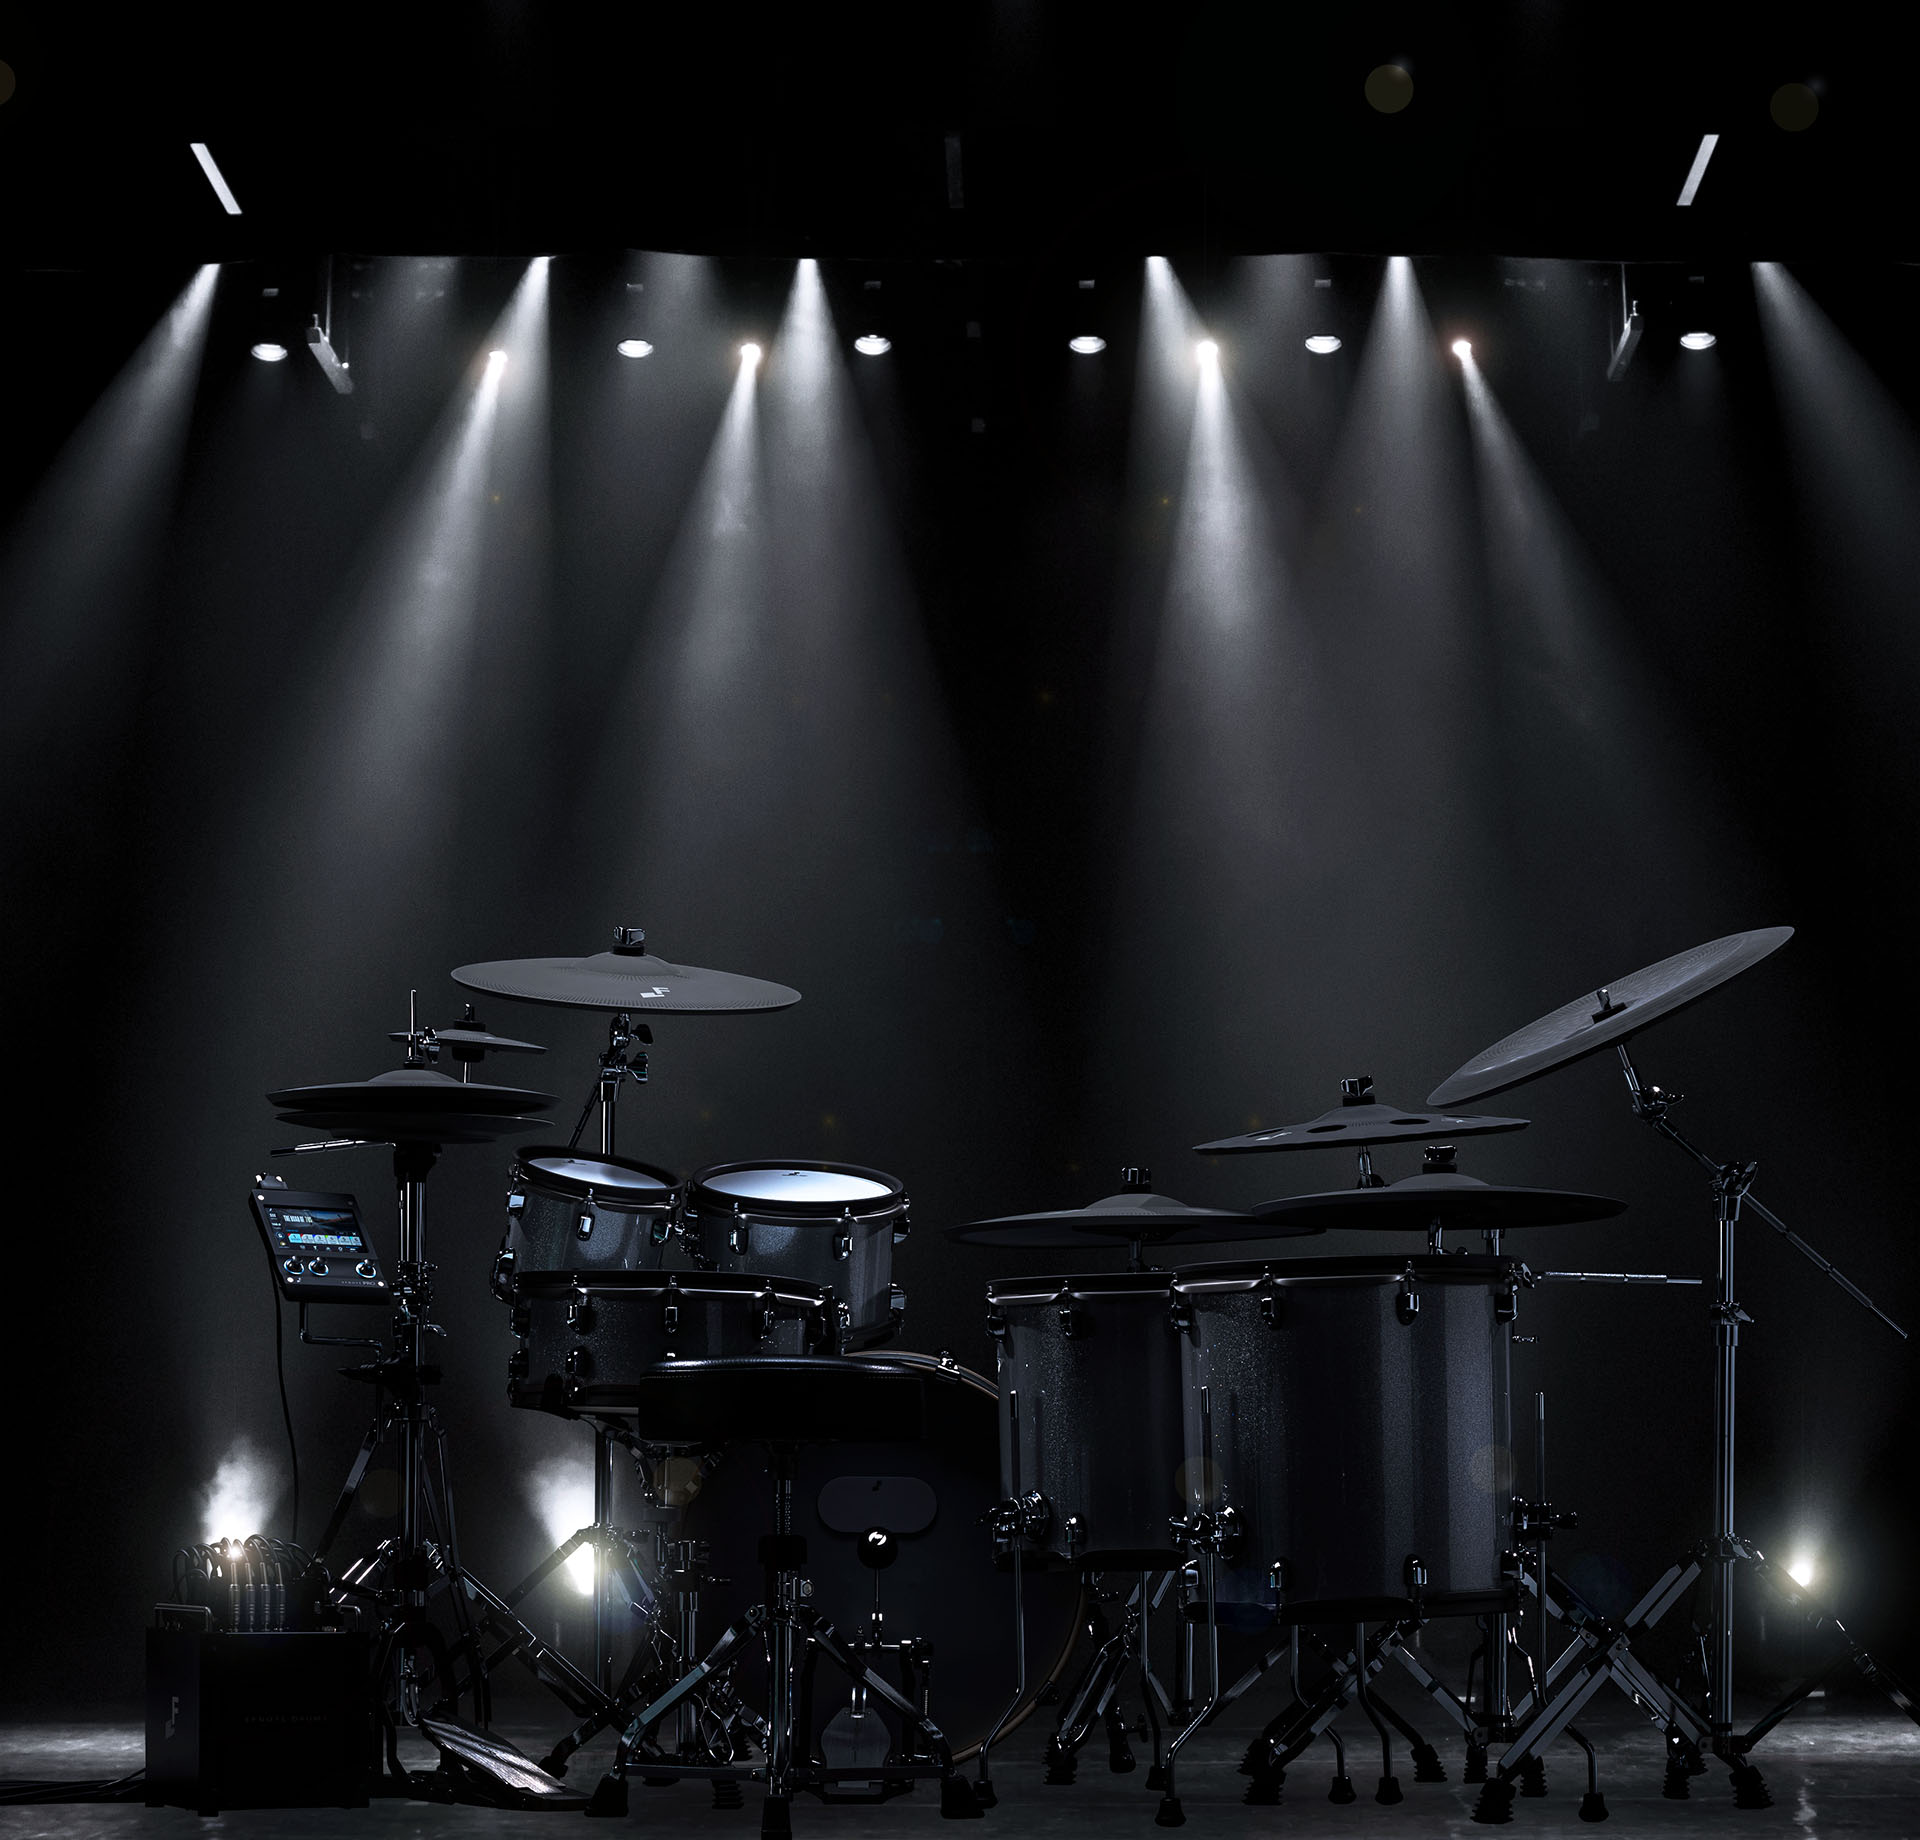 Electronic Drums EFNOTE PRO